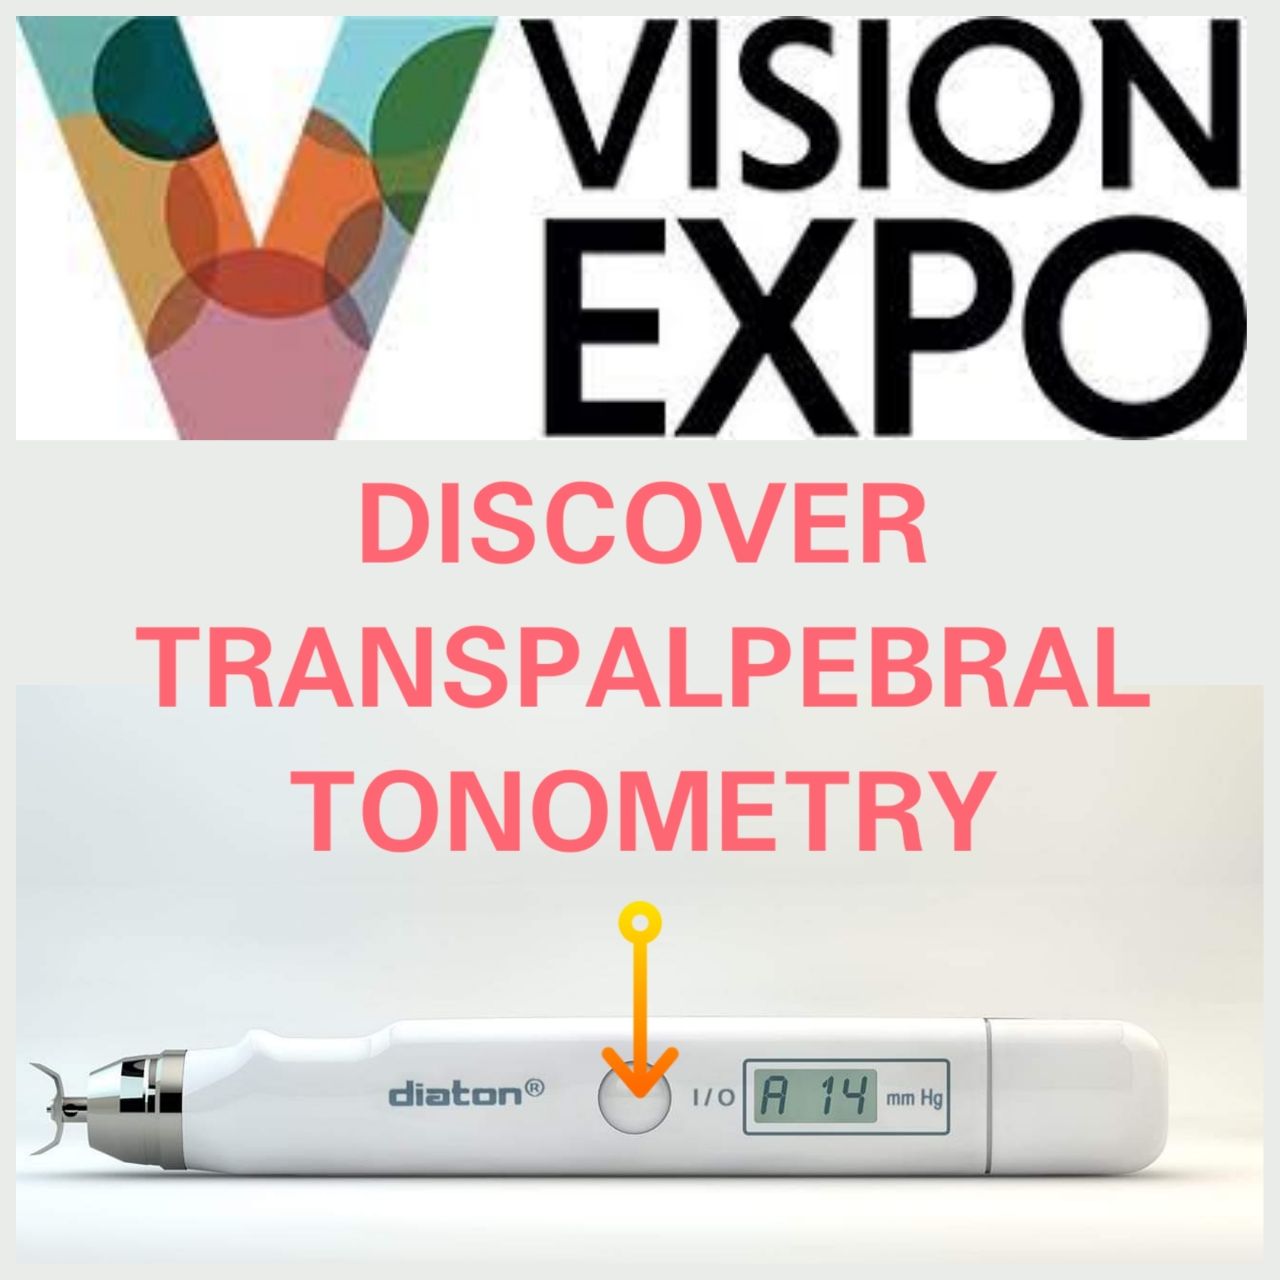 Revolutionary Transpalpebral Tonometer by Diaton Offers Safer IOP Measurement at Vision Expo West